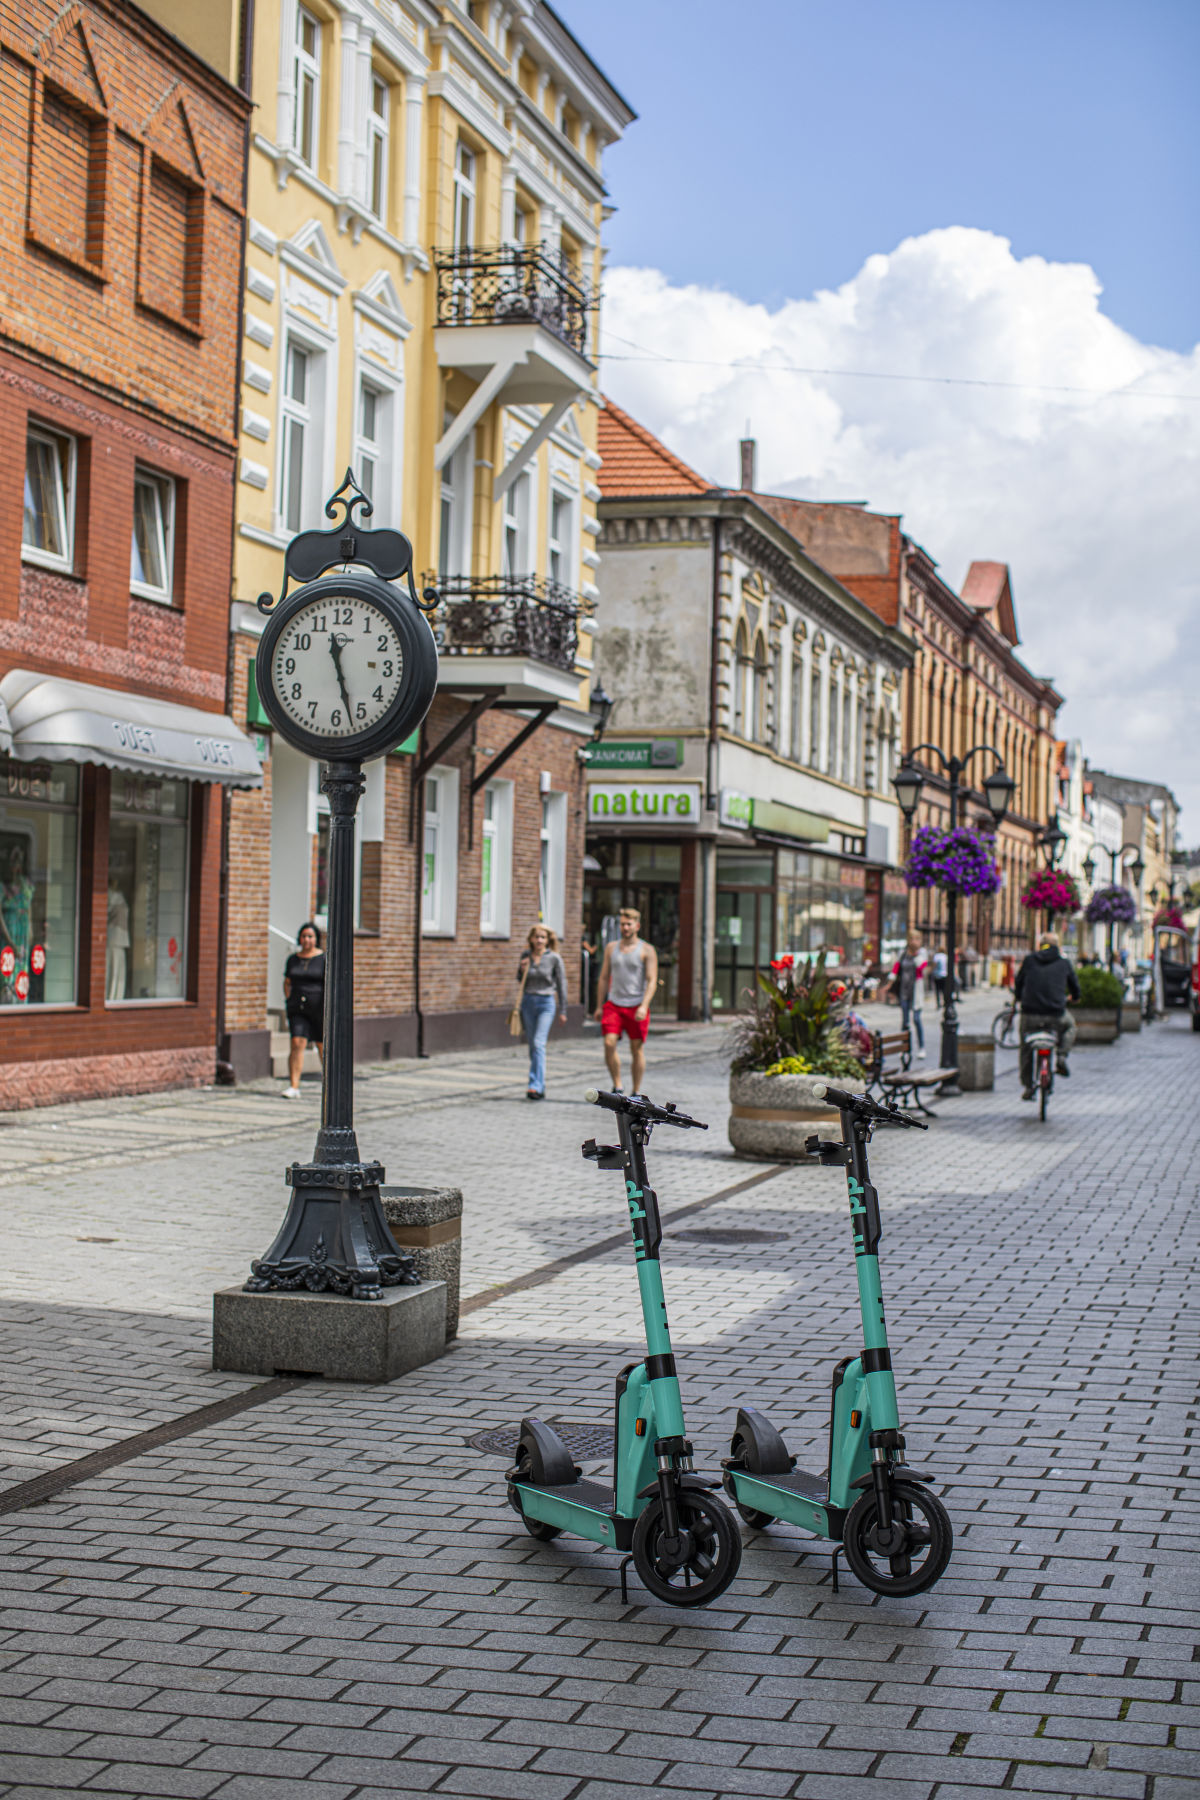 Hopp's first Polish franchise, launched in the summer of 2022 with 52 brand new e-scooters.